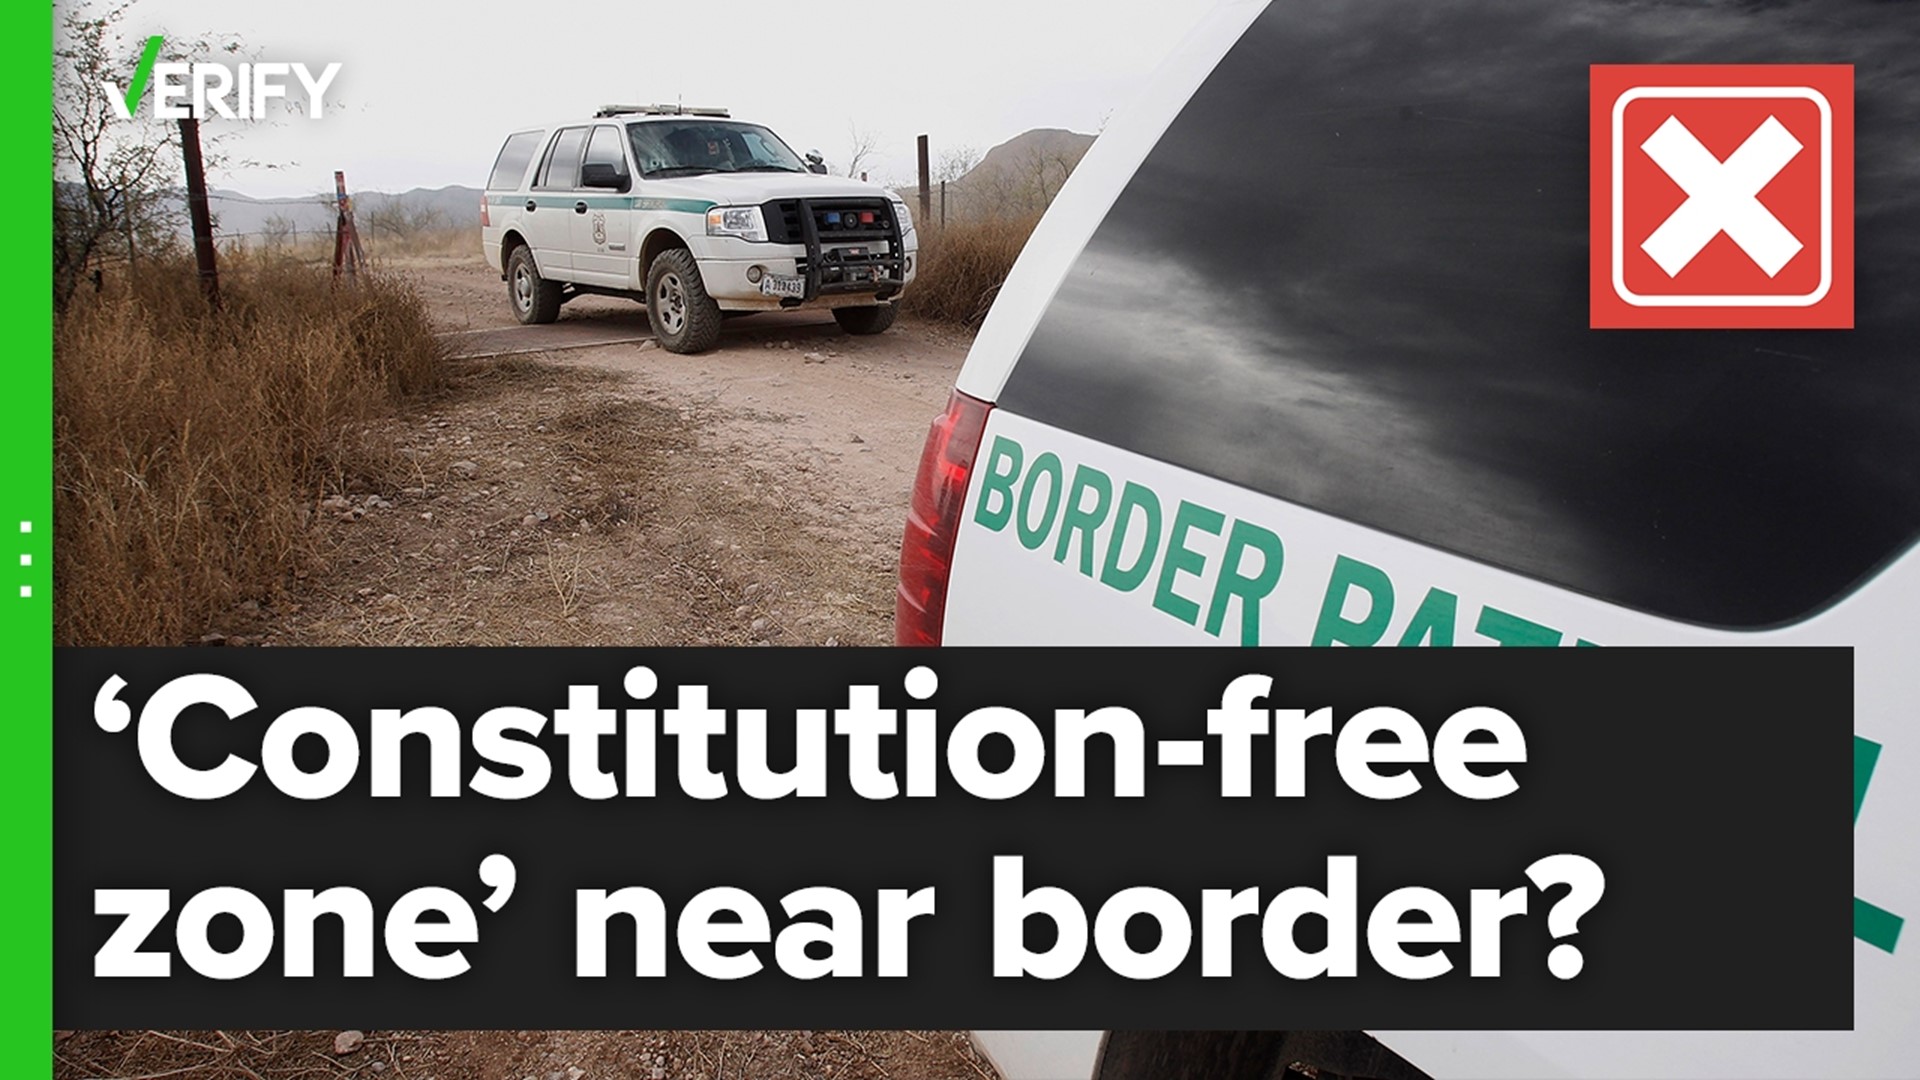 Claims the Supreme Court allowed warrantless home searches within 100 miles of the U.S. border are false. Here’s what the court actually did.